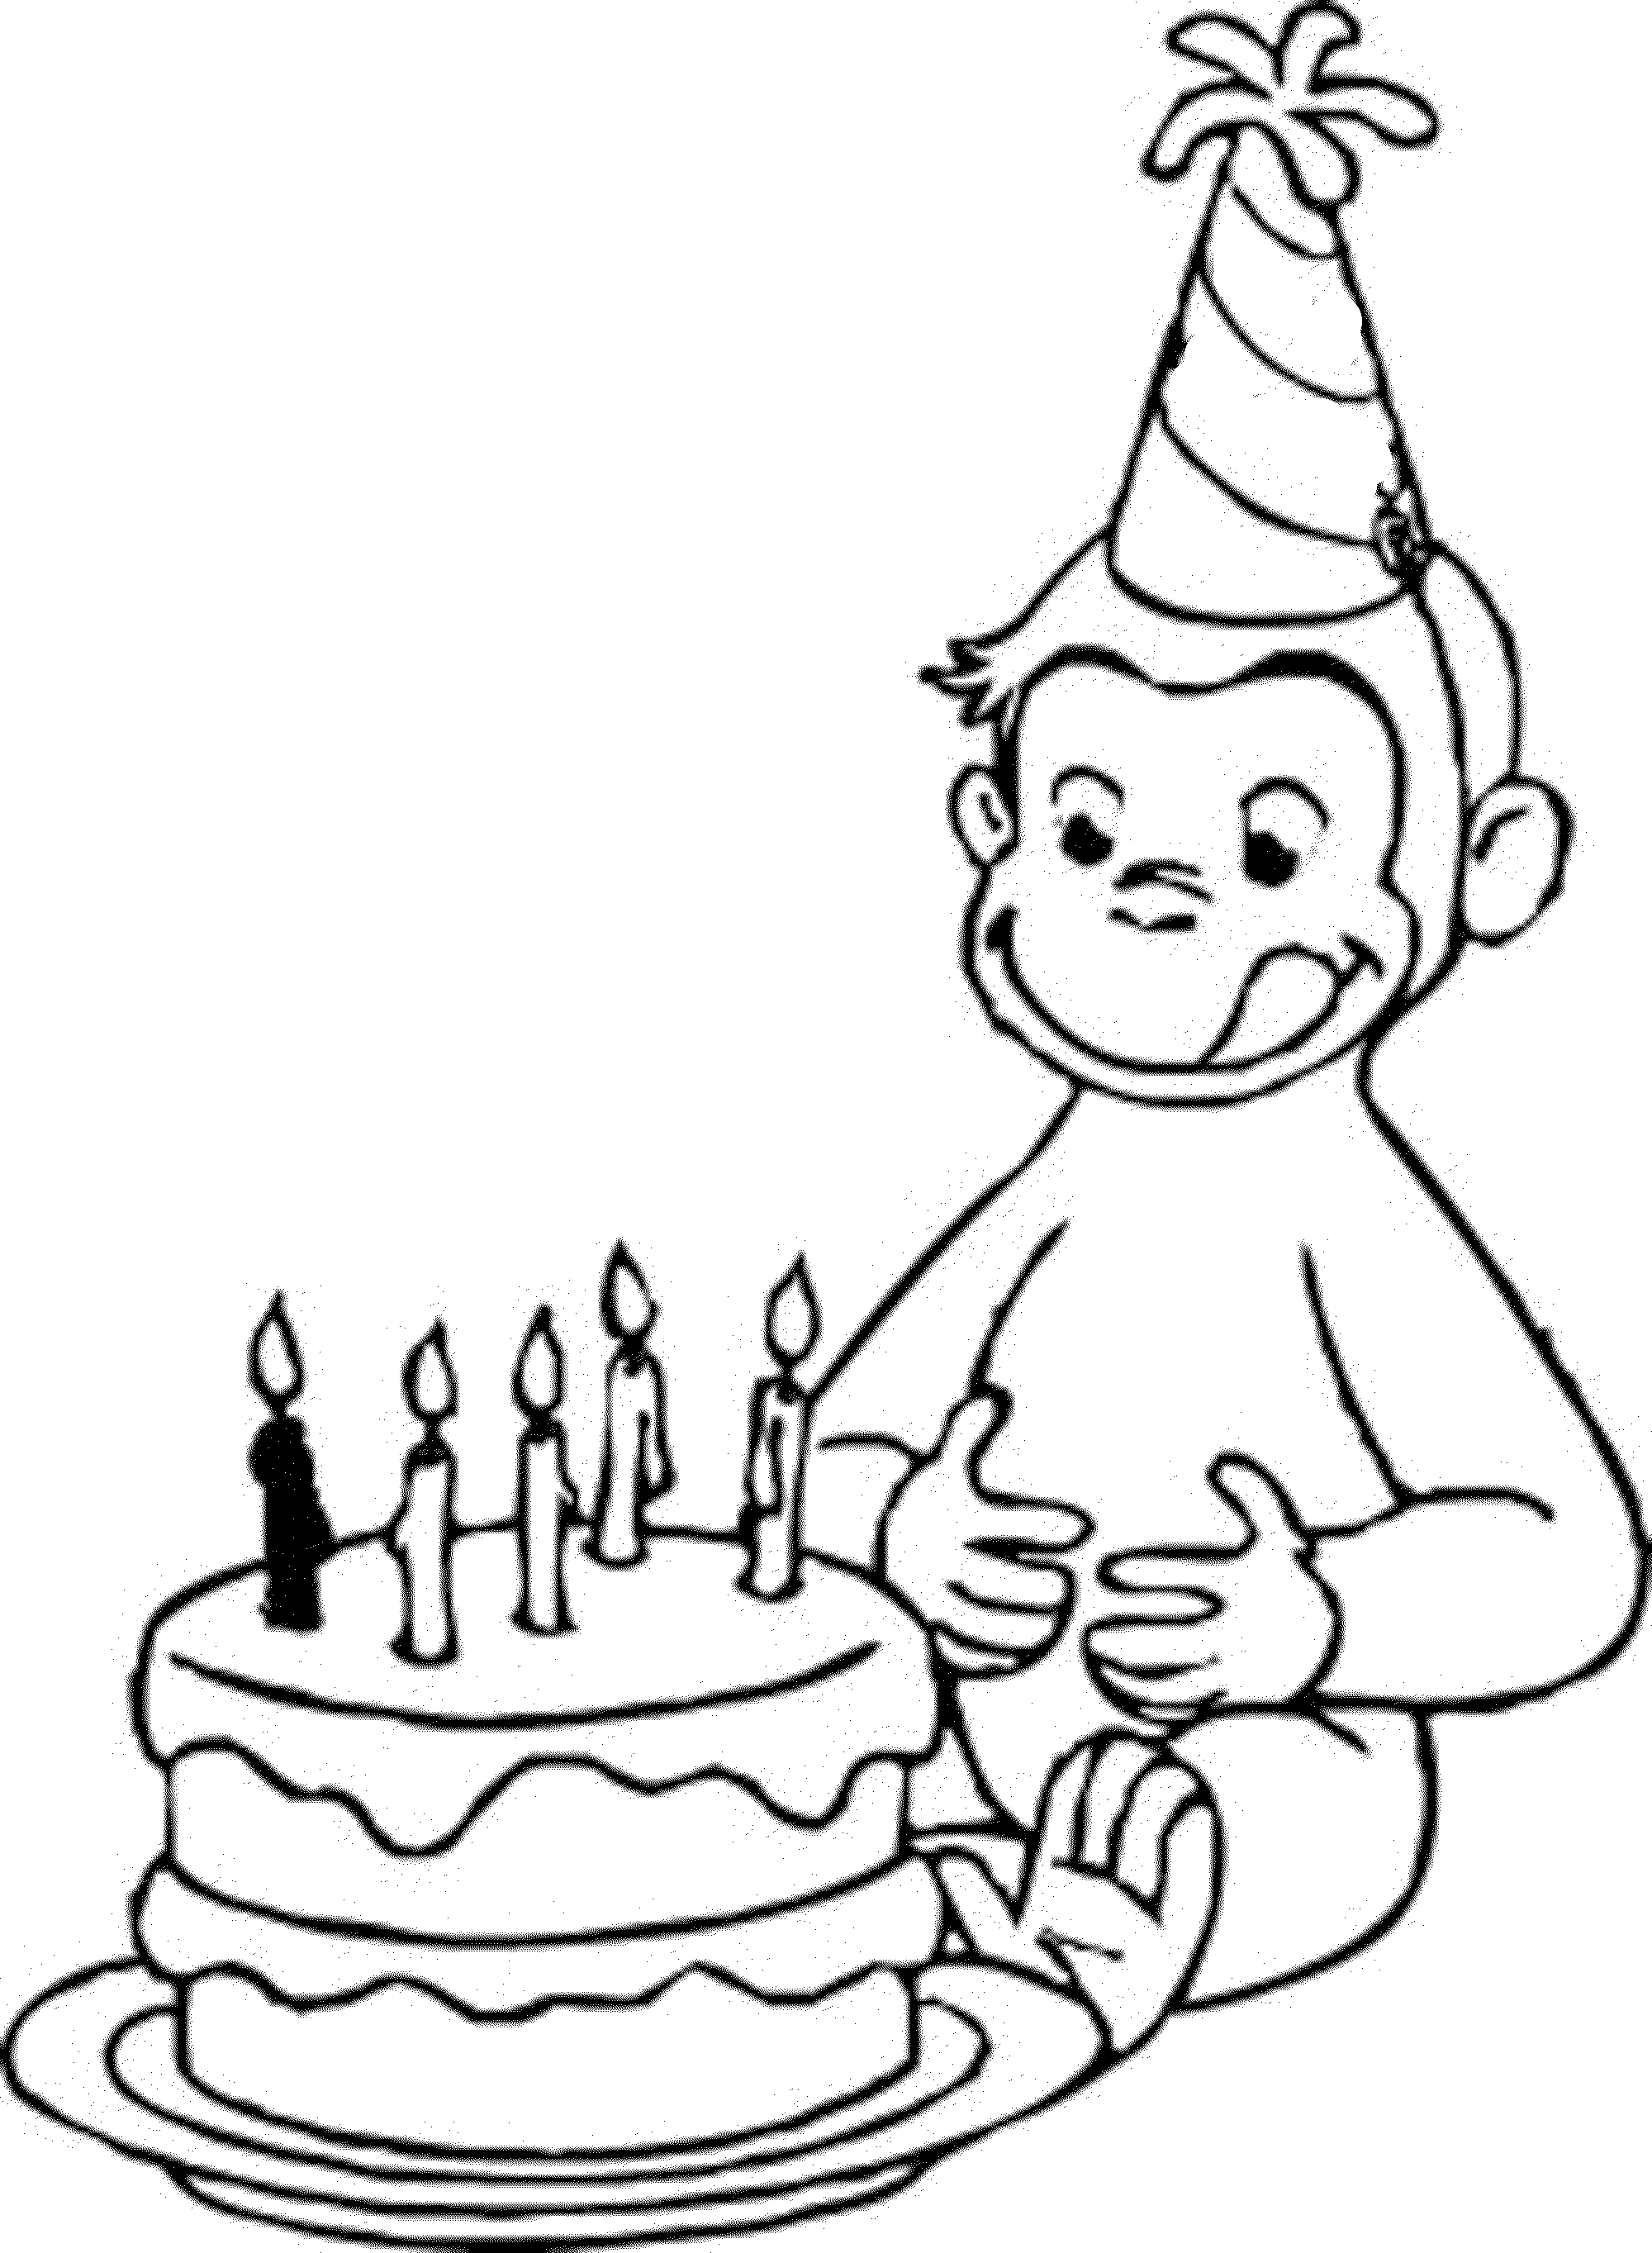 free-free-birthday-coloring-pages-for-grandpa-download-free-free-birthday-coloring-pages-for